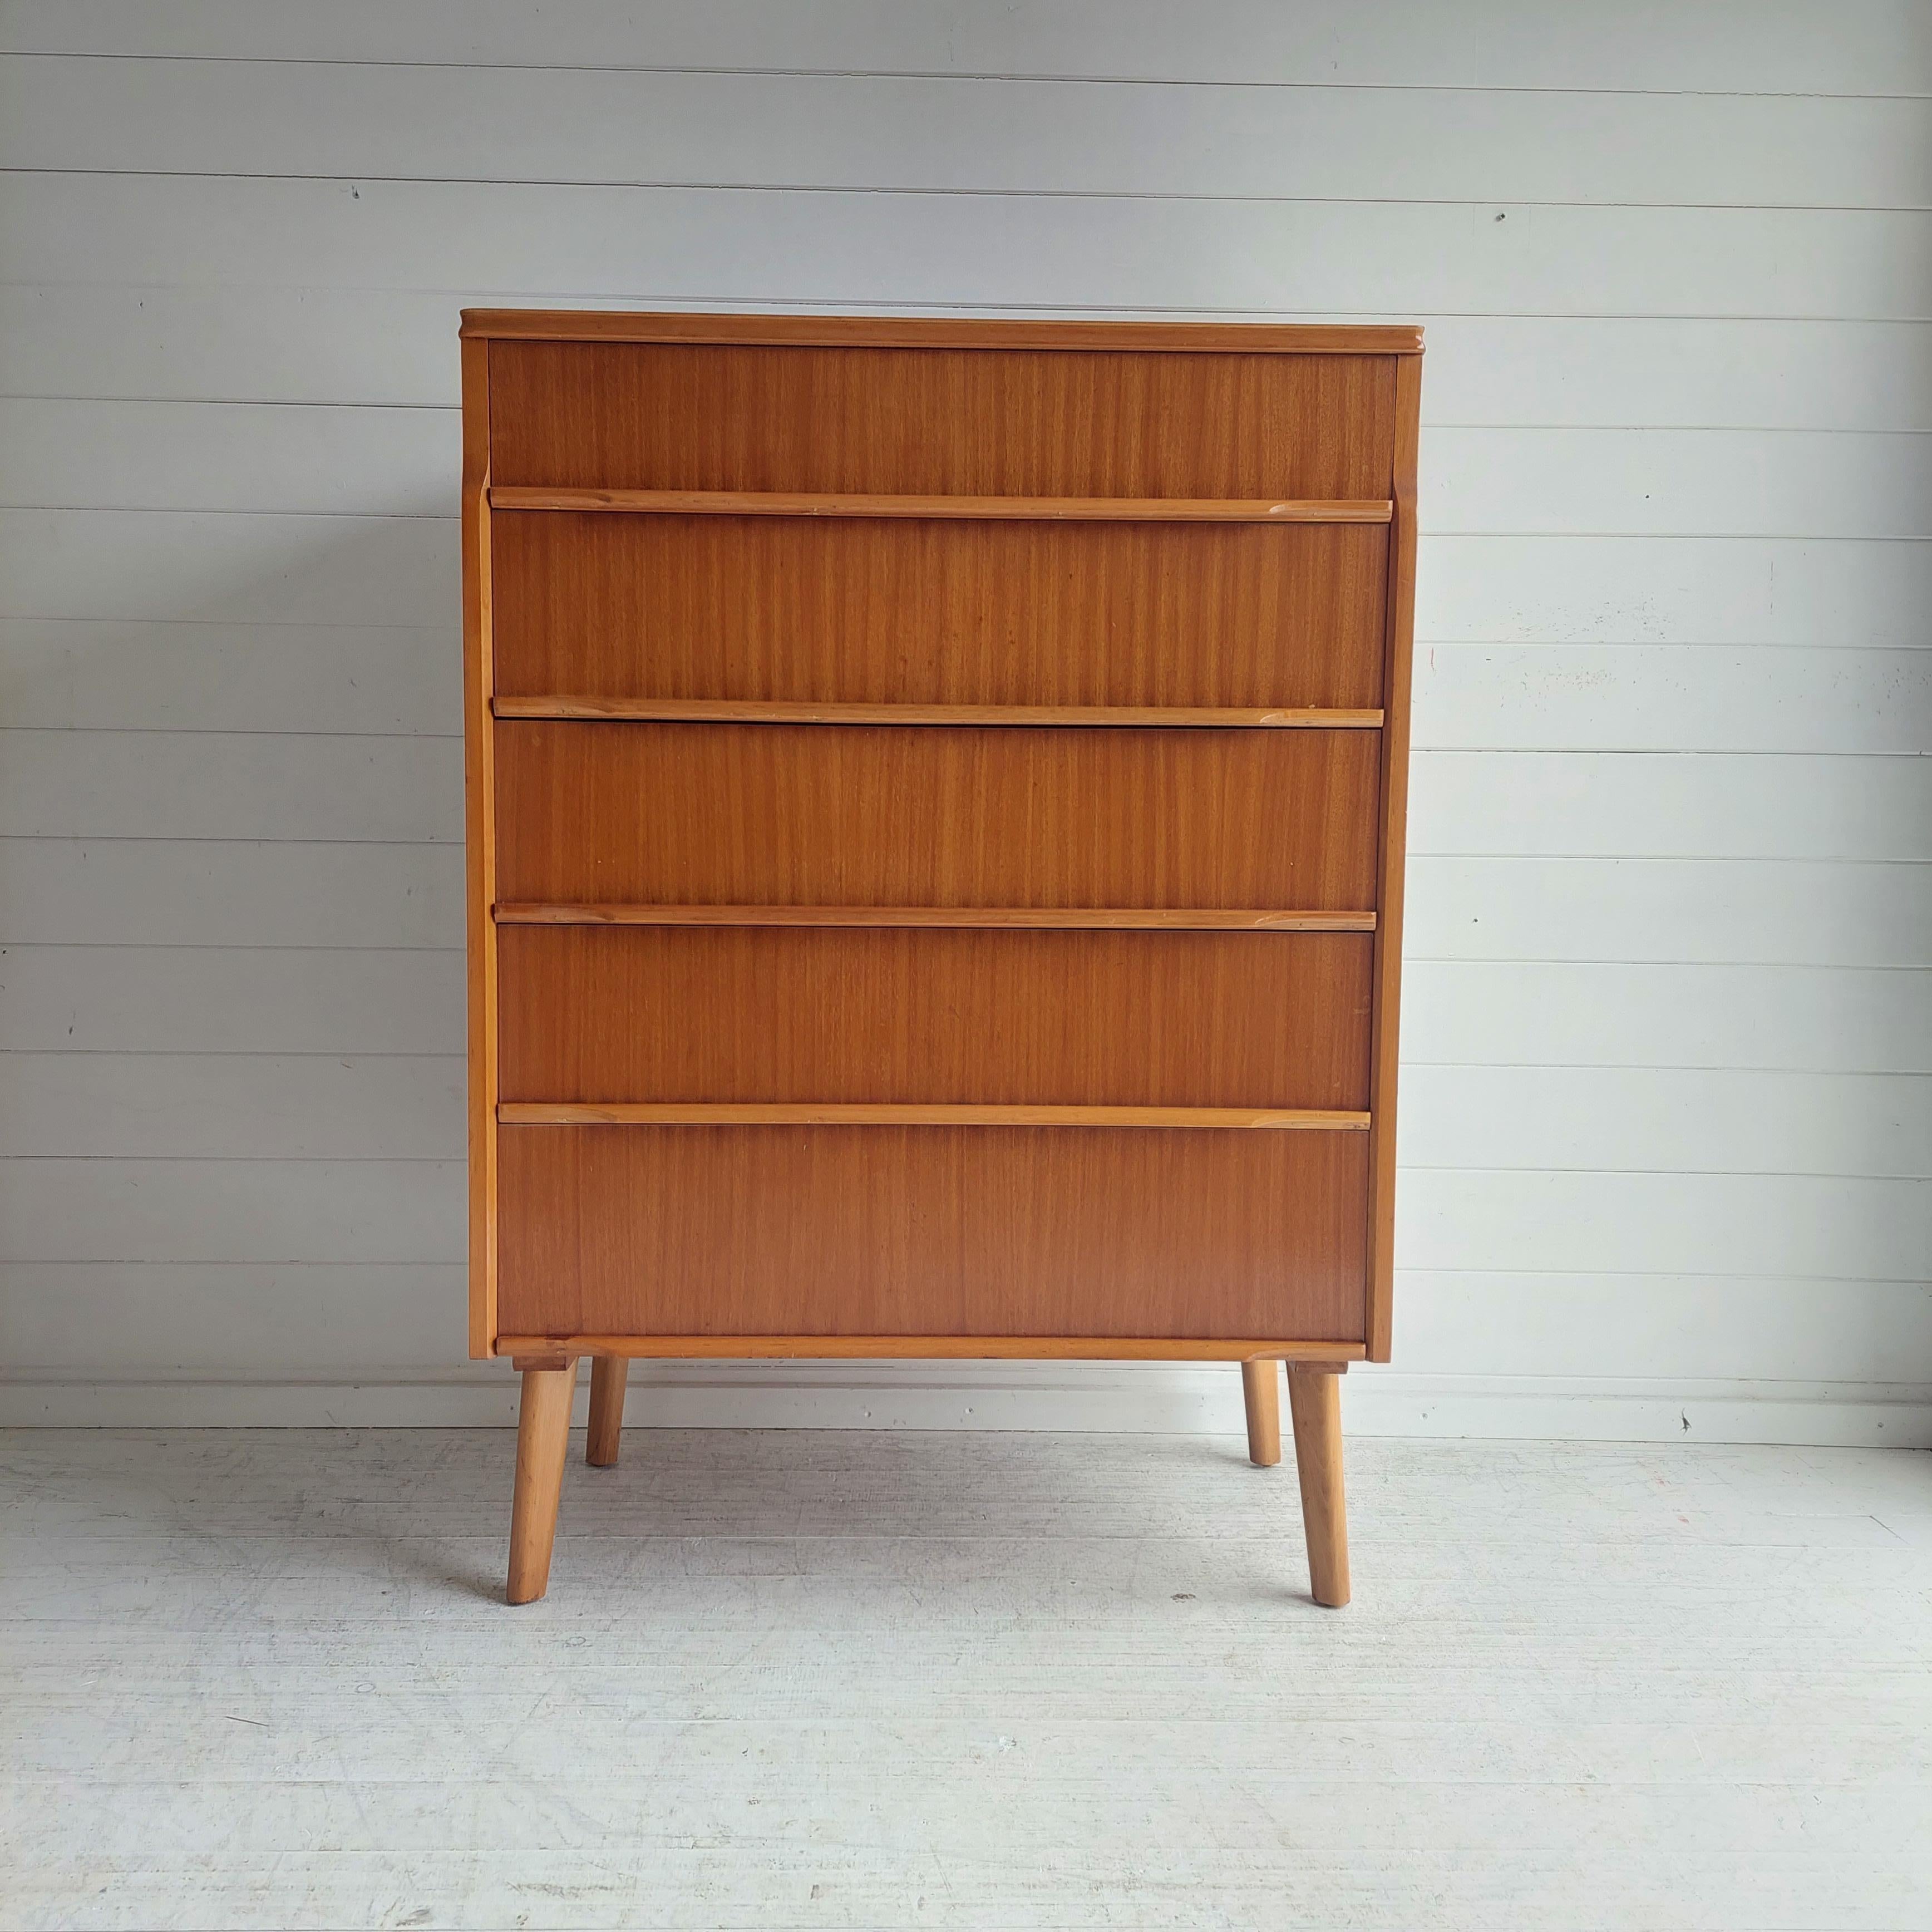 A British tall chest of drawers 
Mid century vintage teak 5 draw chest of drawers Tallboy manufactured by the British company Bluestone and Elvin and this piece is from their Beeanese range.
Circa 1960s

The unit is finished in light teak veneers